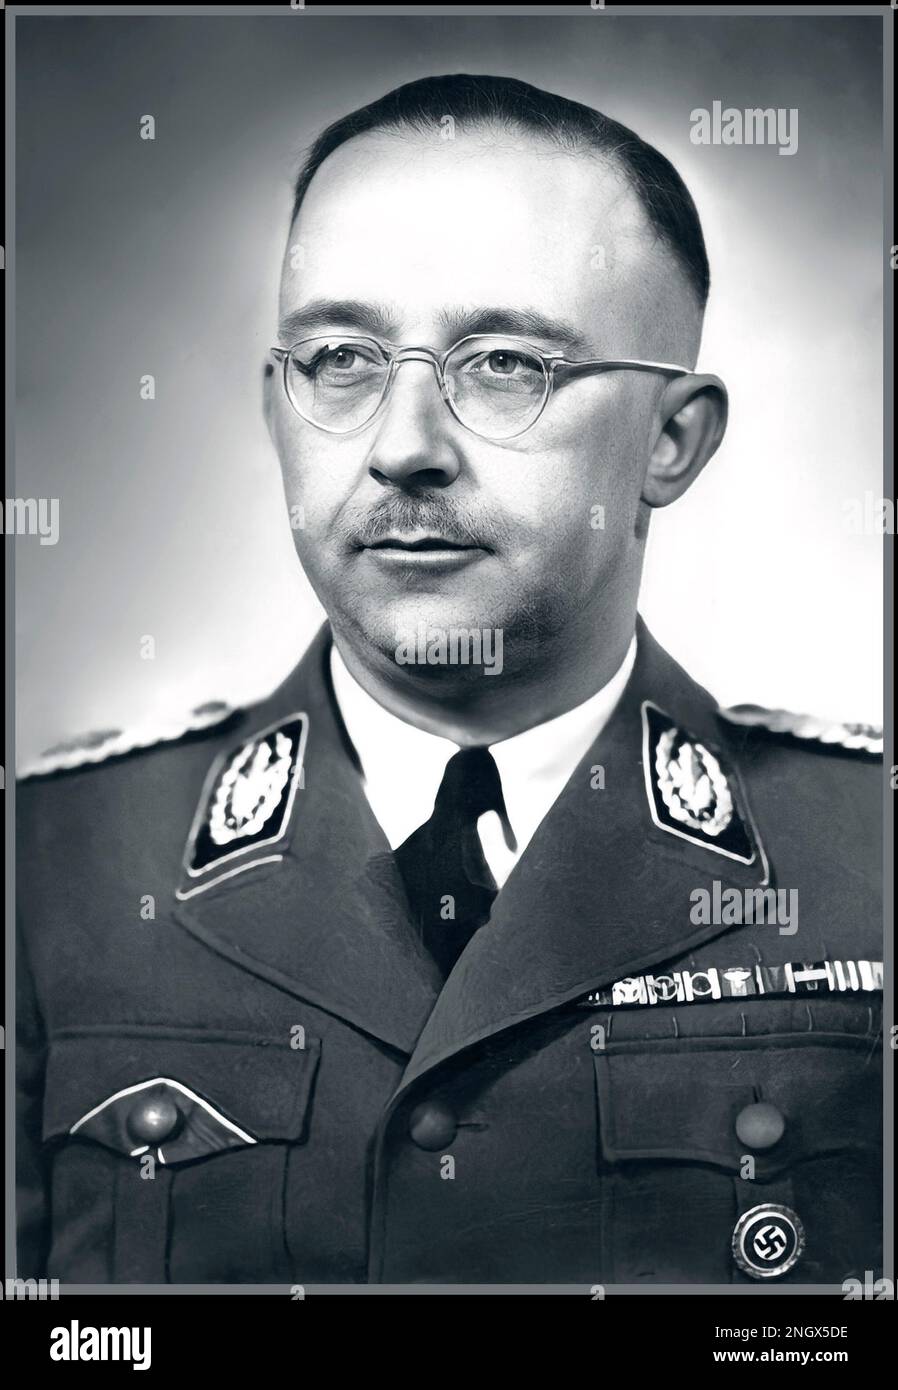 HIMMLER NAZI Heinrich Luitpold Himmler WW2 Nazi. was Reichsführer of the Schutzstaffel, and a leading member of the Nazi Party of Germany. Himmler was one of the most powerful men in Nazi Germany and the main architect of the Holocaust. Date 1942 He committed suicide before being tried for crimes against humanity. Stock Photo